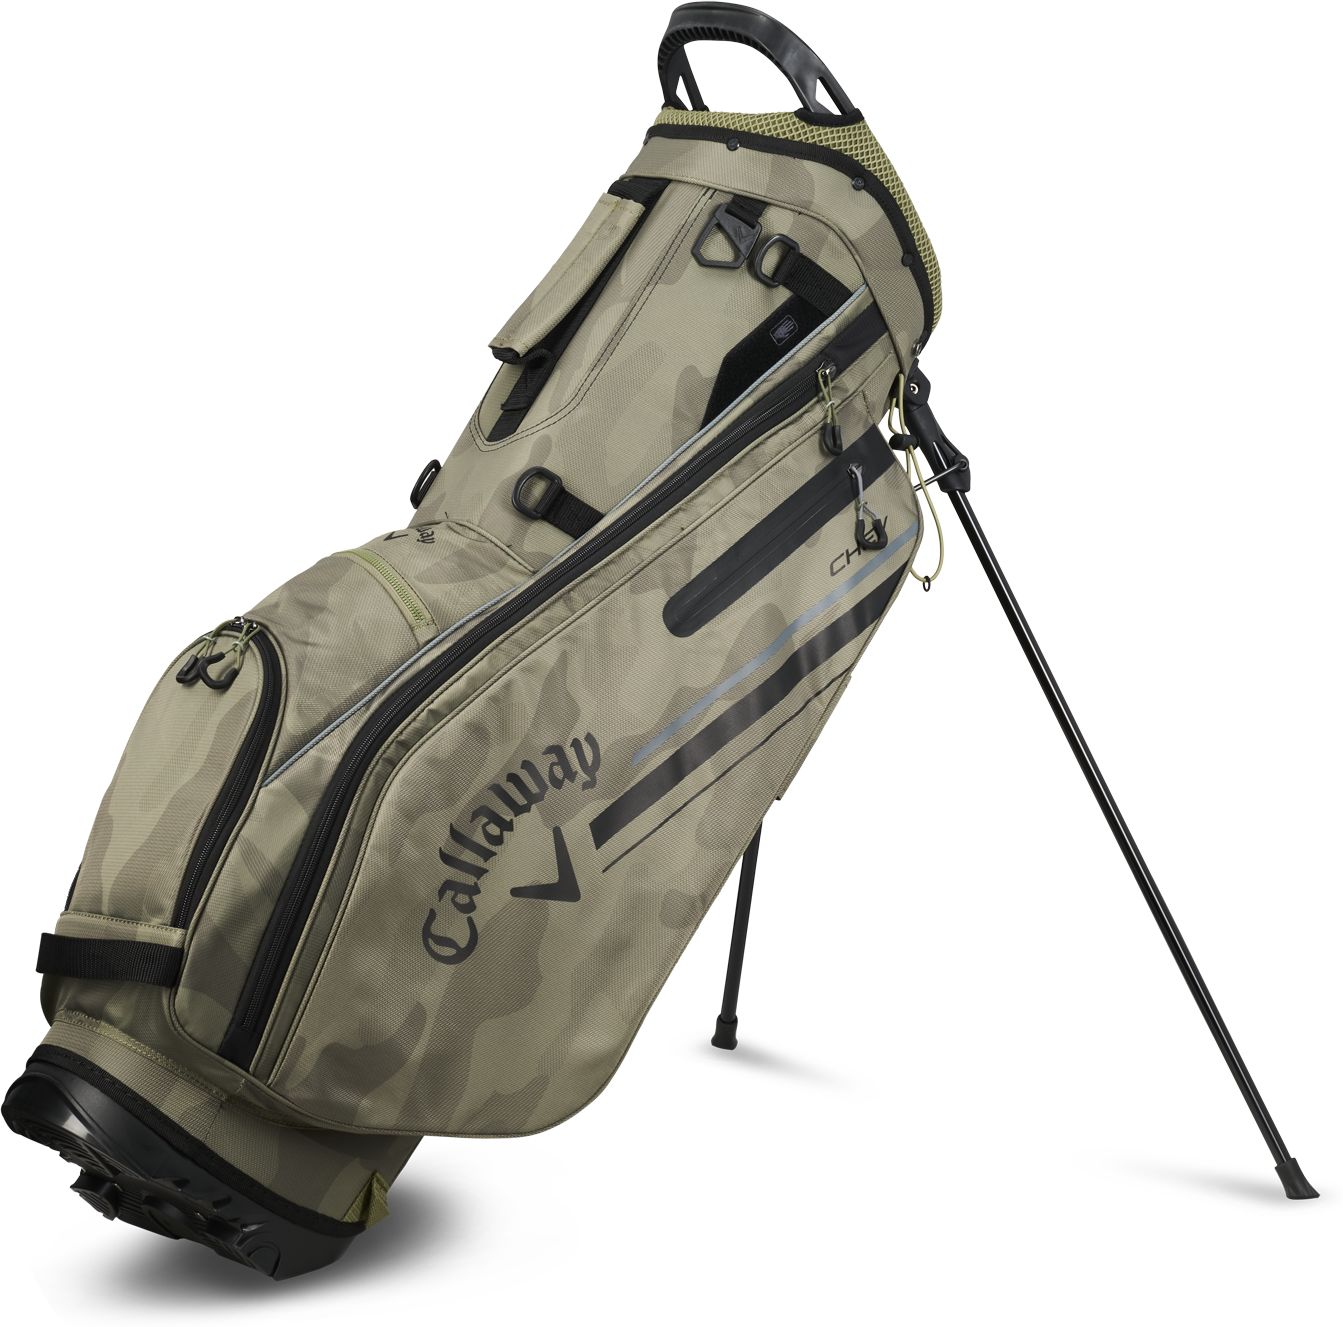 CALLAWAY, CHEV STAND BAG